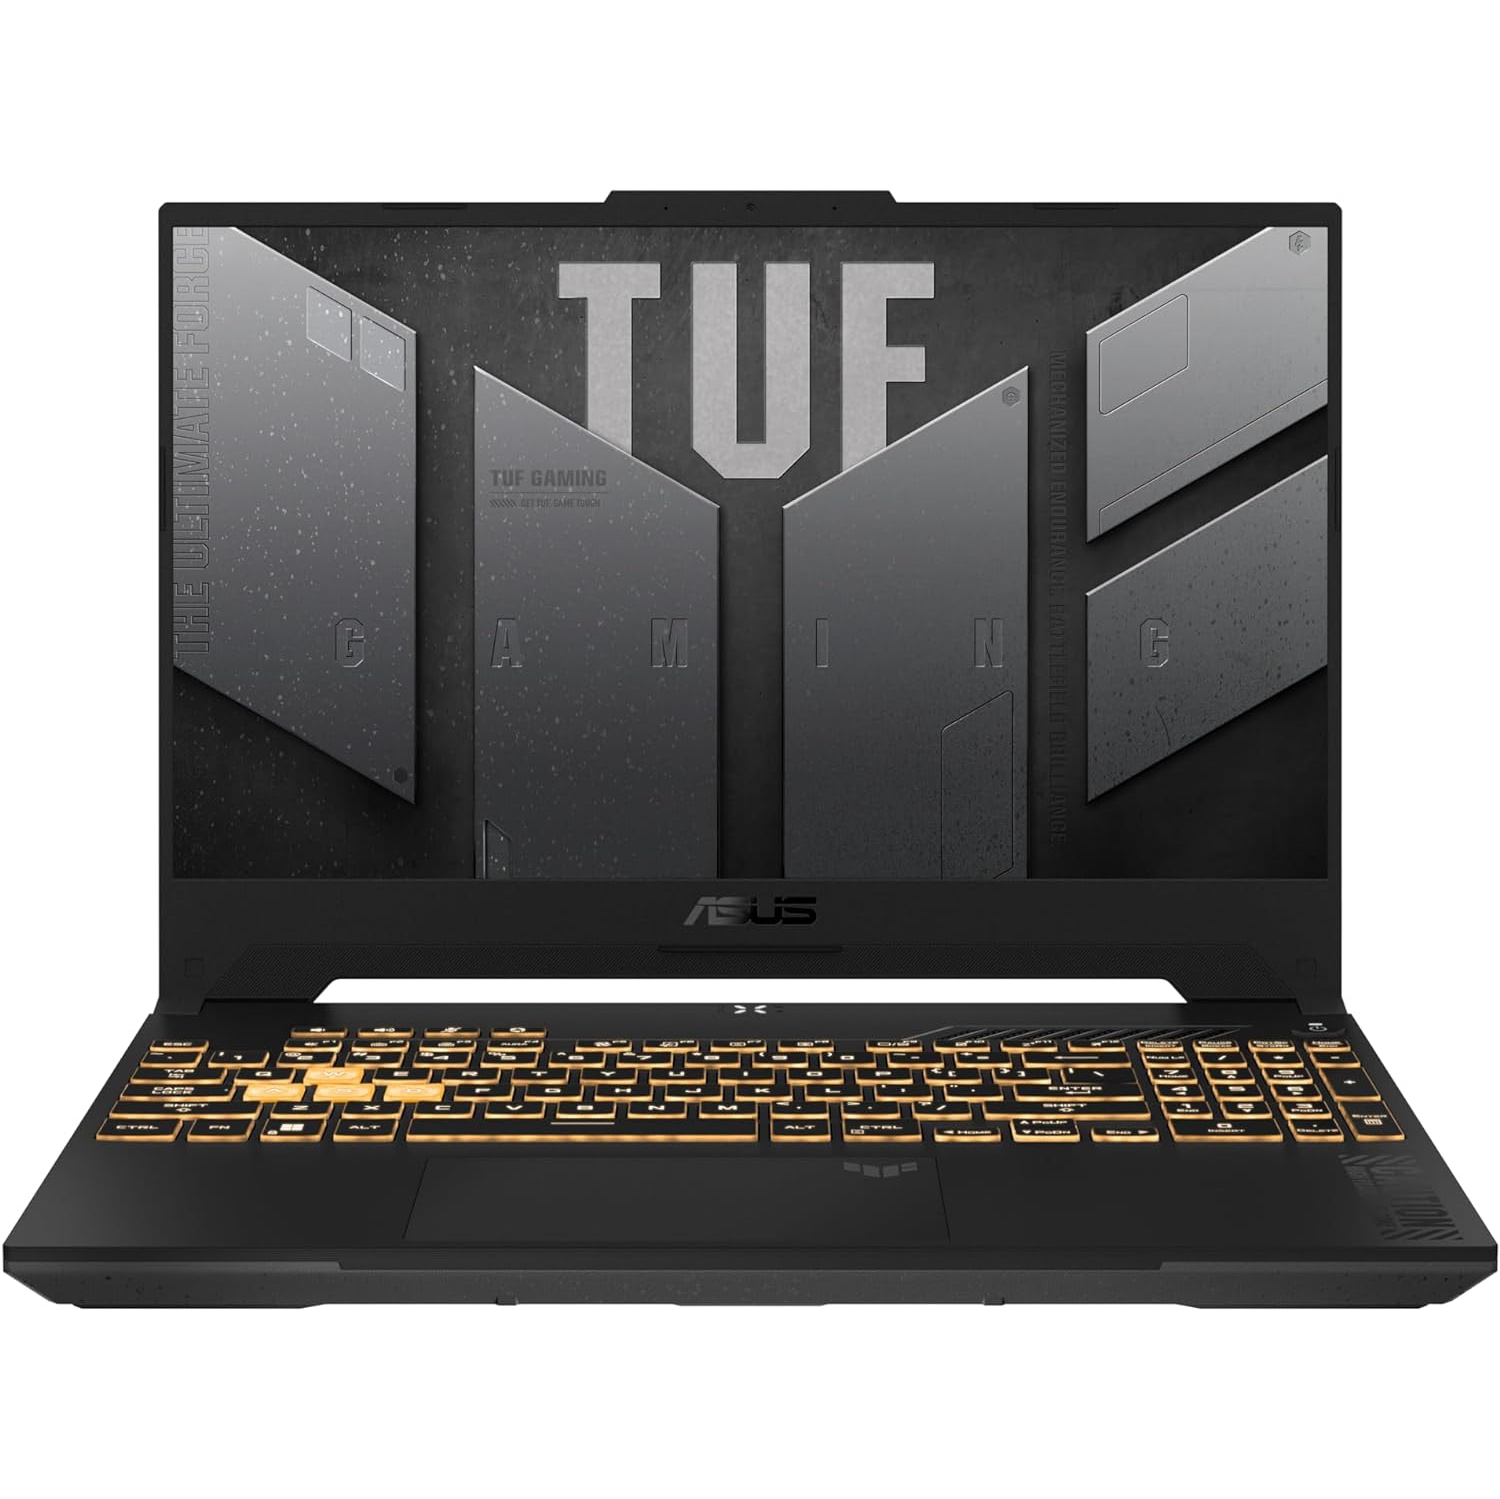 ASUS TUF Gaming F15 15.6" Gaming Laptop, Intel Core i5-11400H, 8GB RAM, 512GB SSD, NVIDIA GeForce RTX 3050 4GB, Windwos 10 Home (Win. 11 Ready)